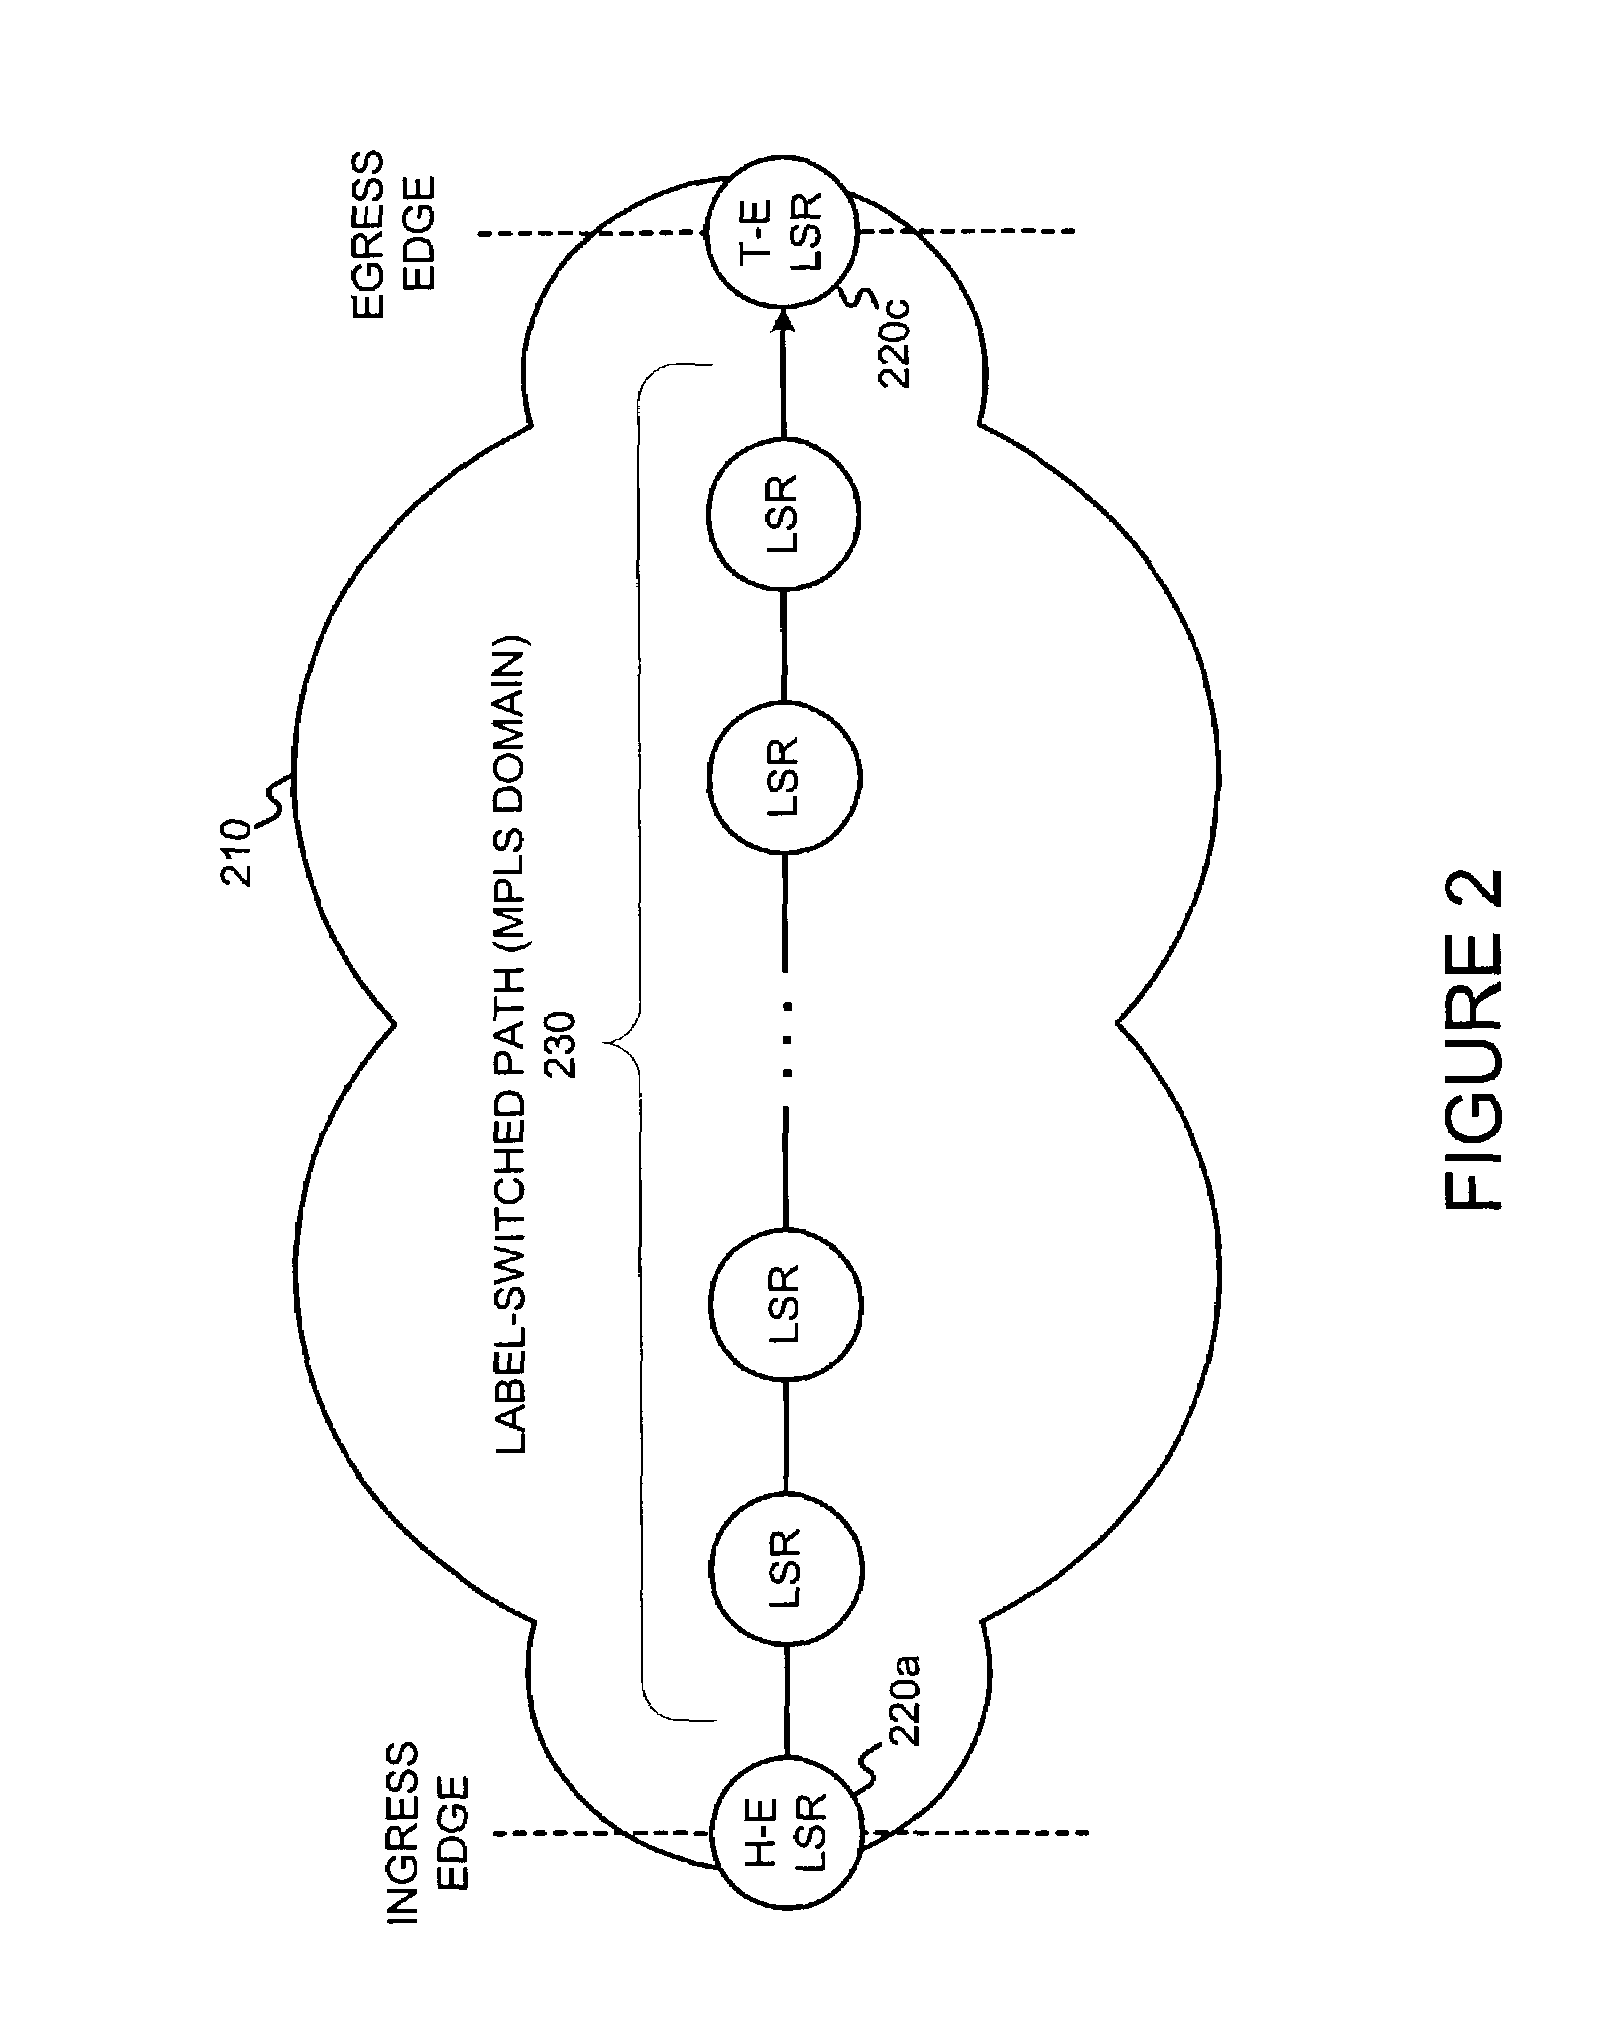 Decoupling functionality related to providing a transparent local area network segment service